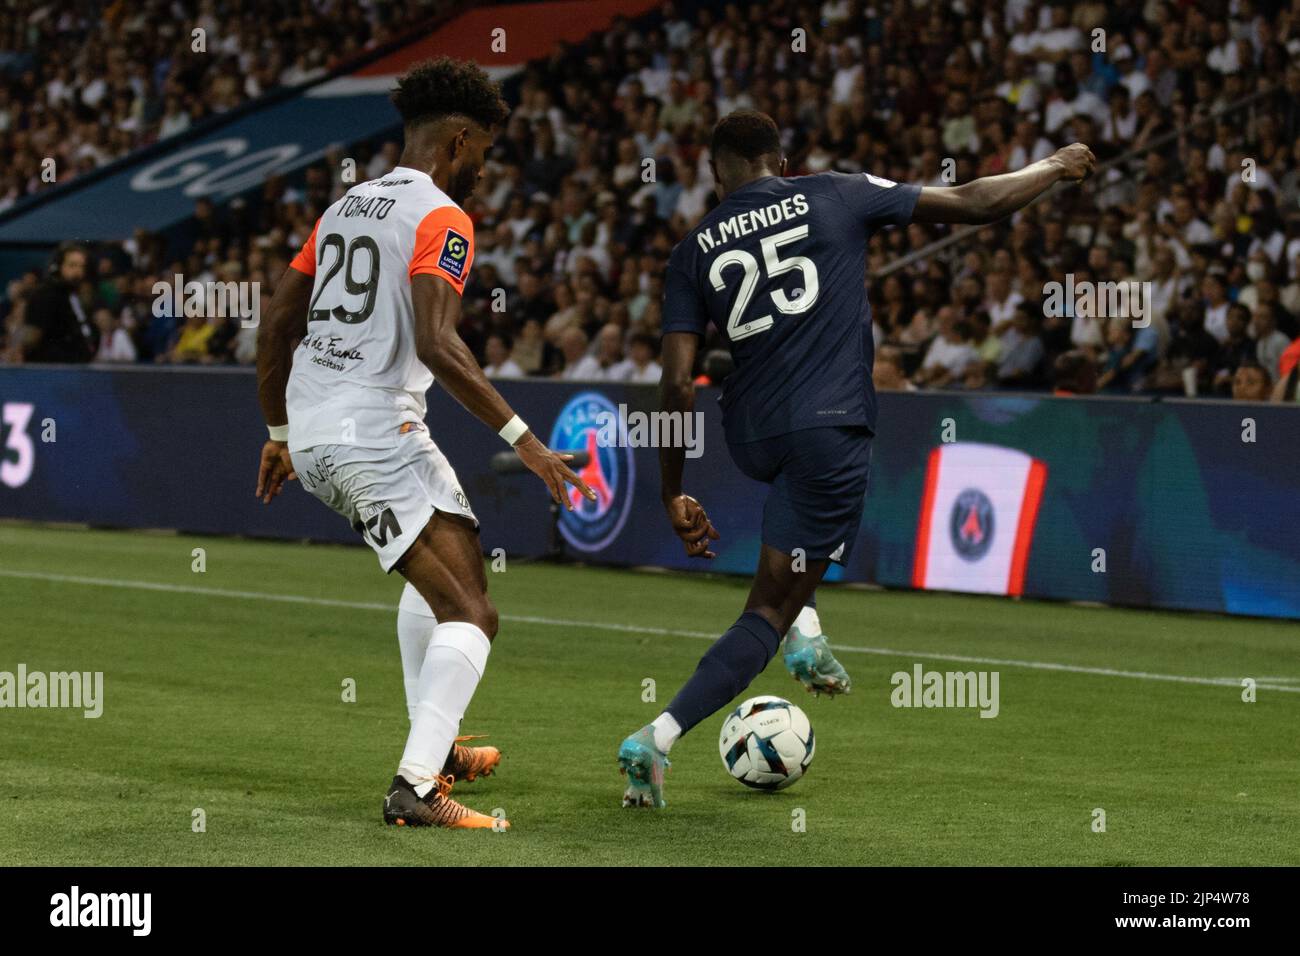 The player Nuno Mendes dancing with the ball against a player of Montpellier Stock Photo